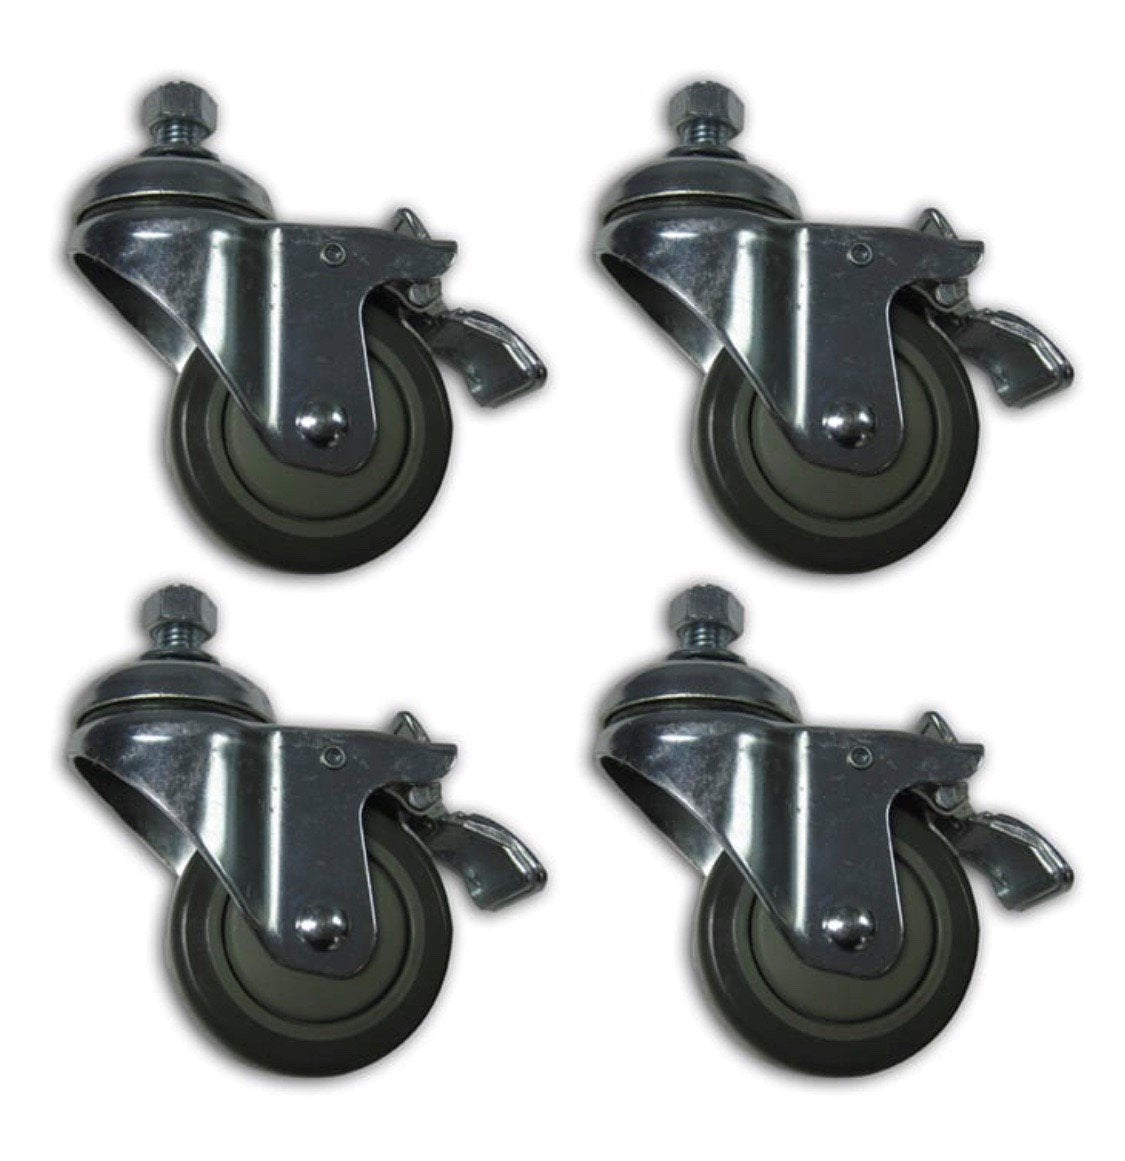 Four stemmed swivel casters with brakes for Supermax Drum Sanders